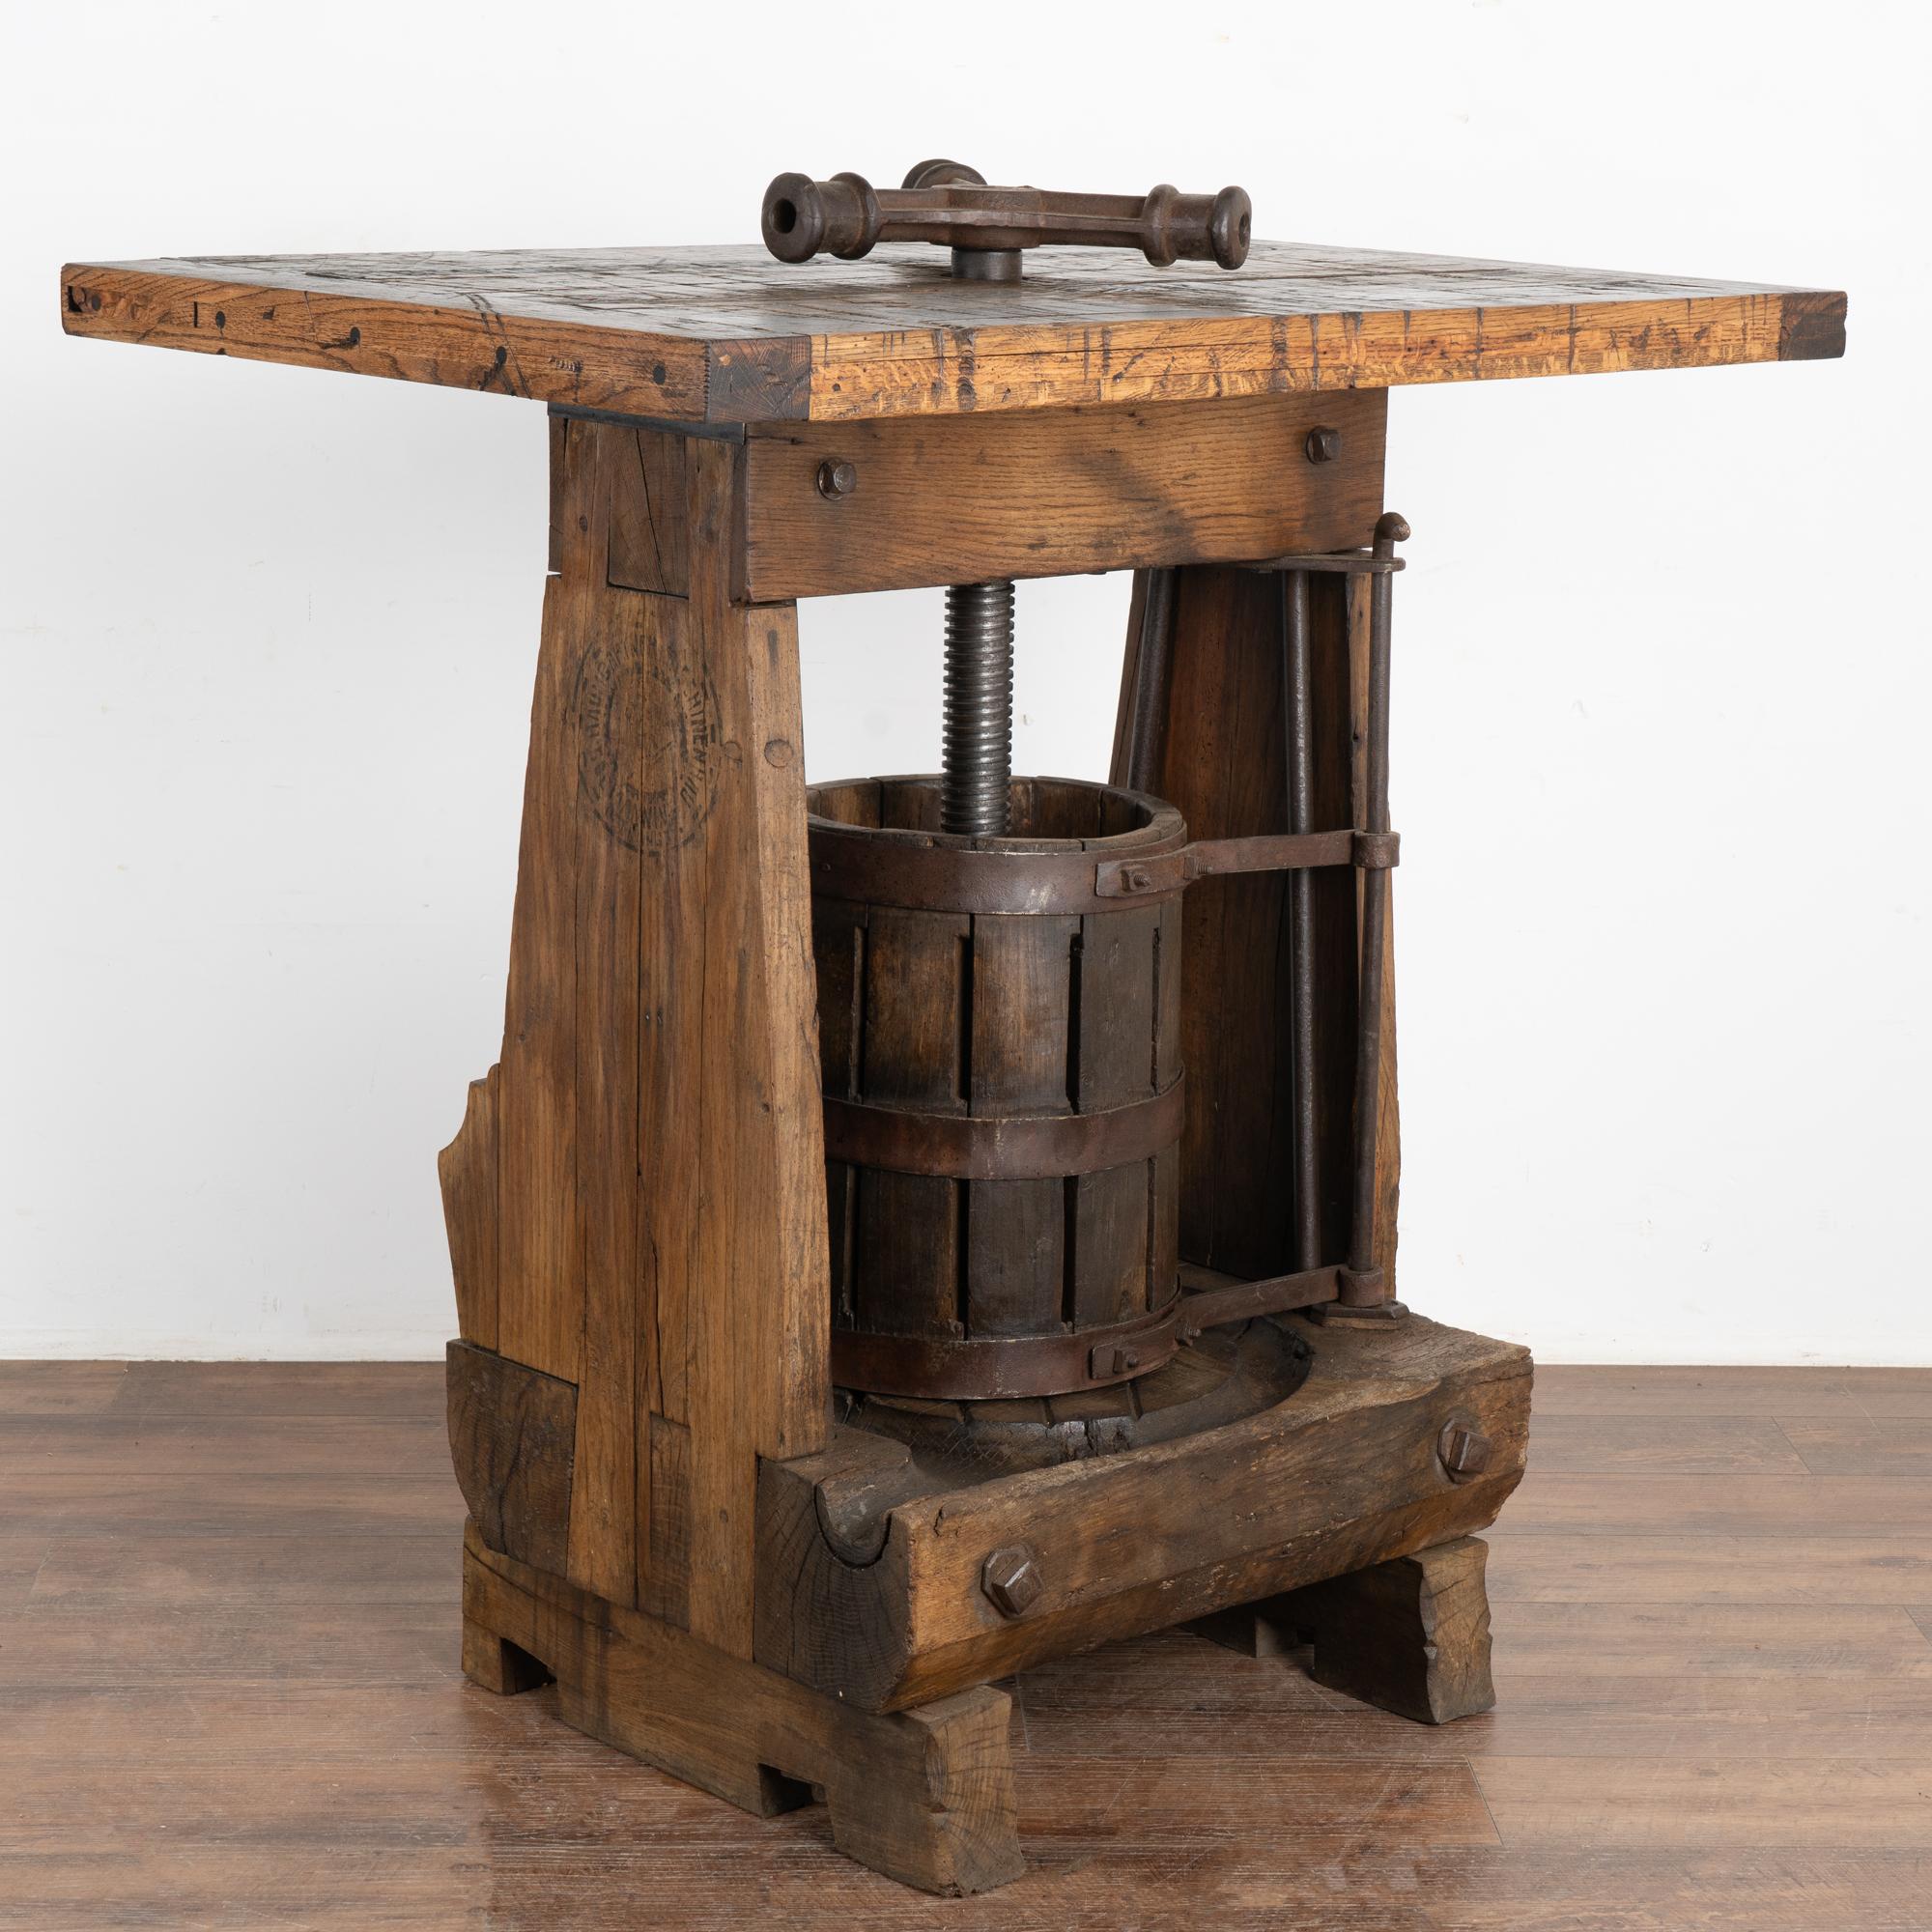 This unique wine tasting table or standing bar/table was created with an antique wine press from Hungary as the intriguing base.
The top is made from old boxcar/railroad car flooring which lends a strong balance to the industrial feel of the lower